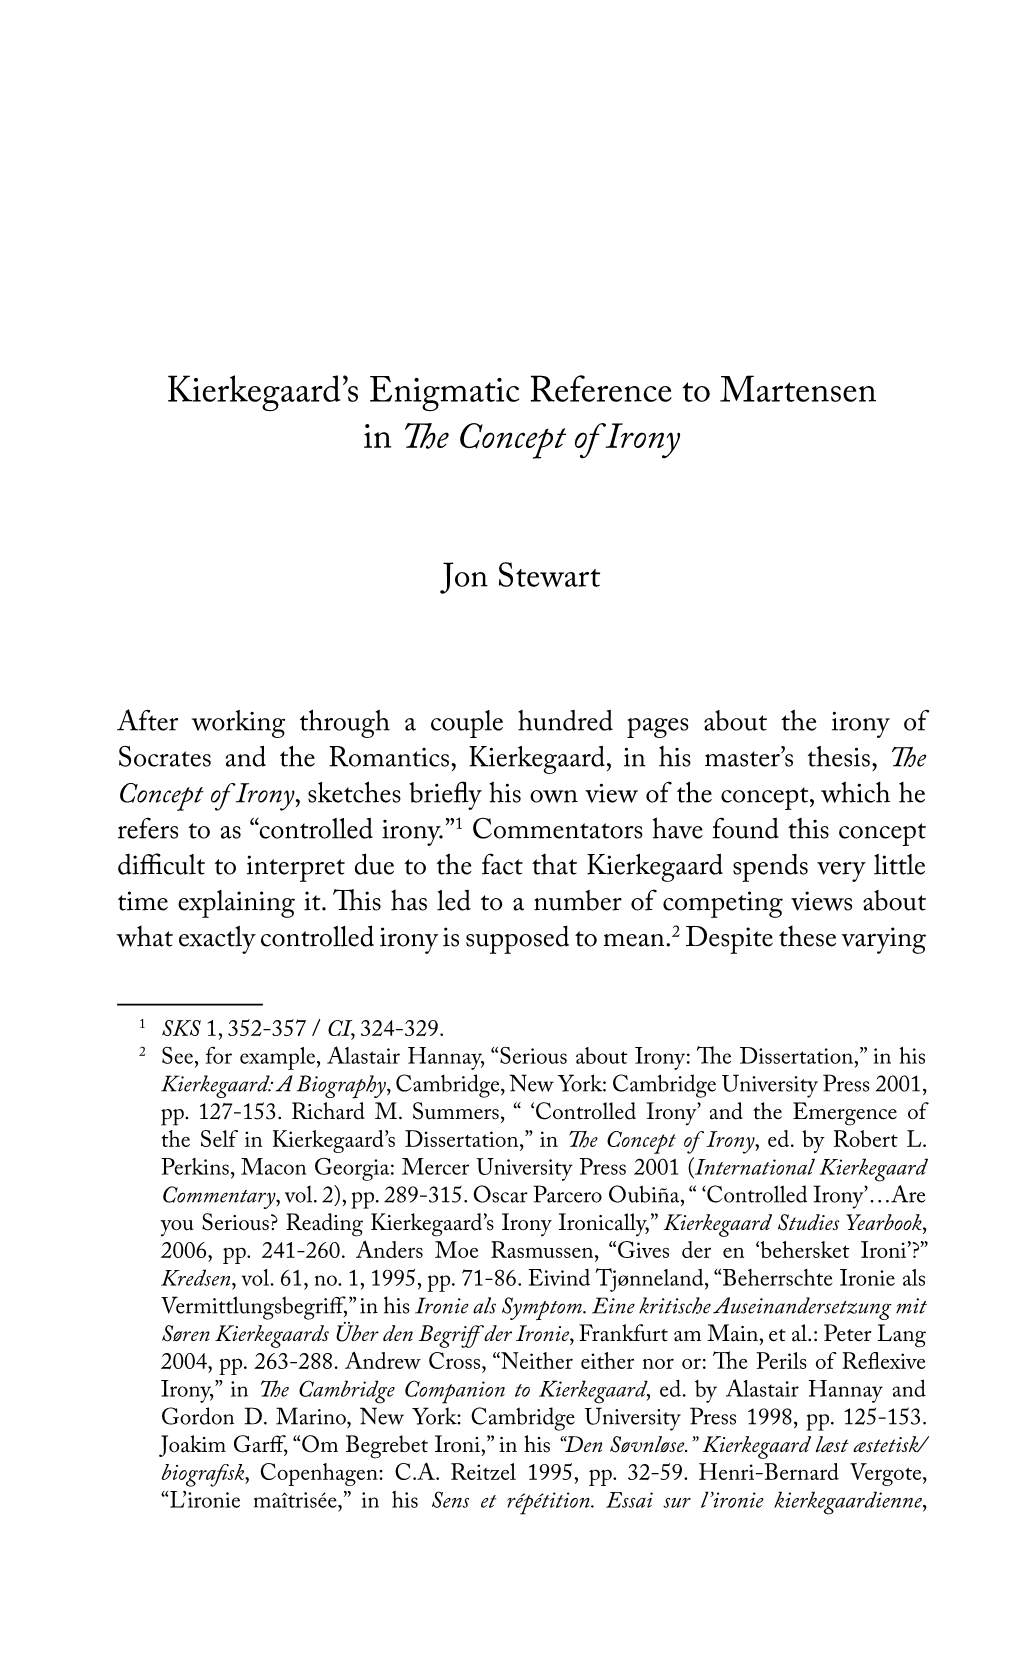 Kierkegaard's Enigmatic Reference to Martensen in the Concept of Irony